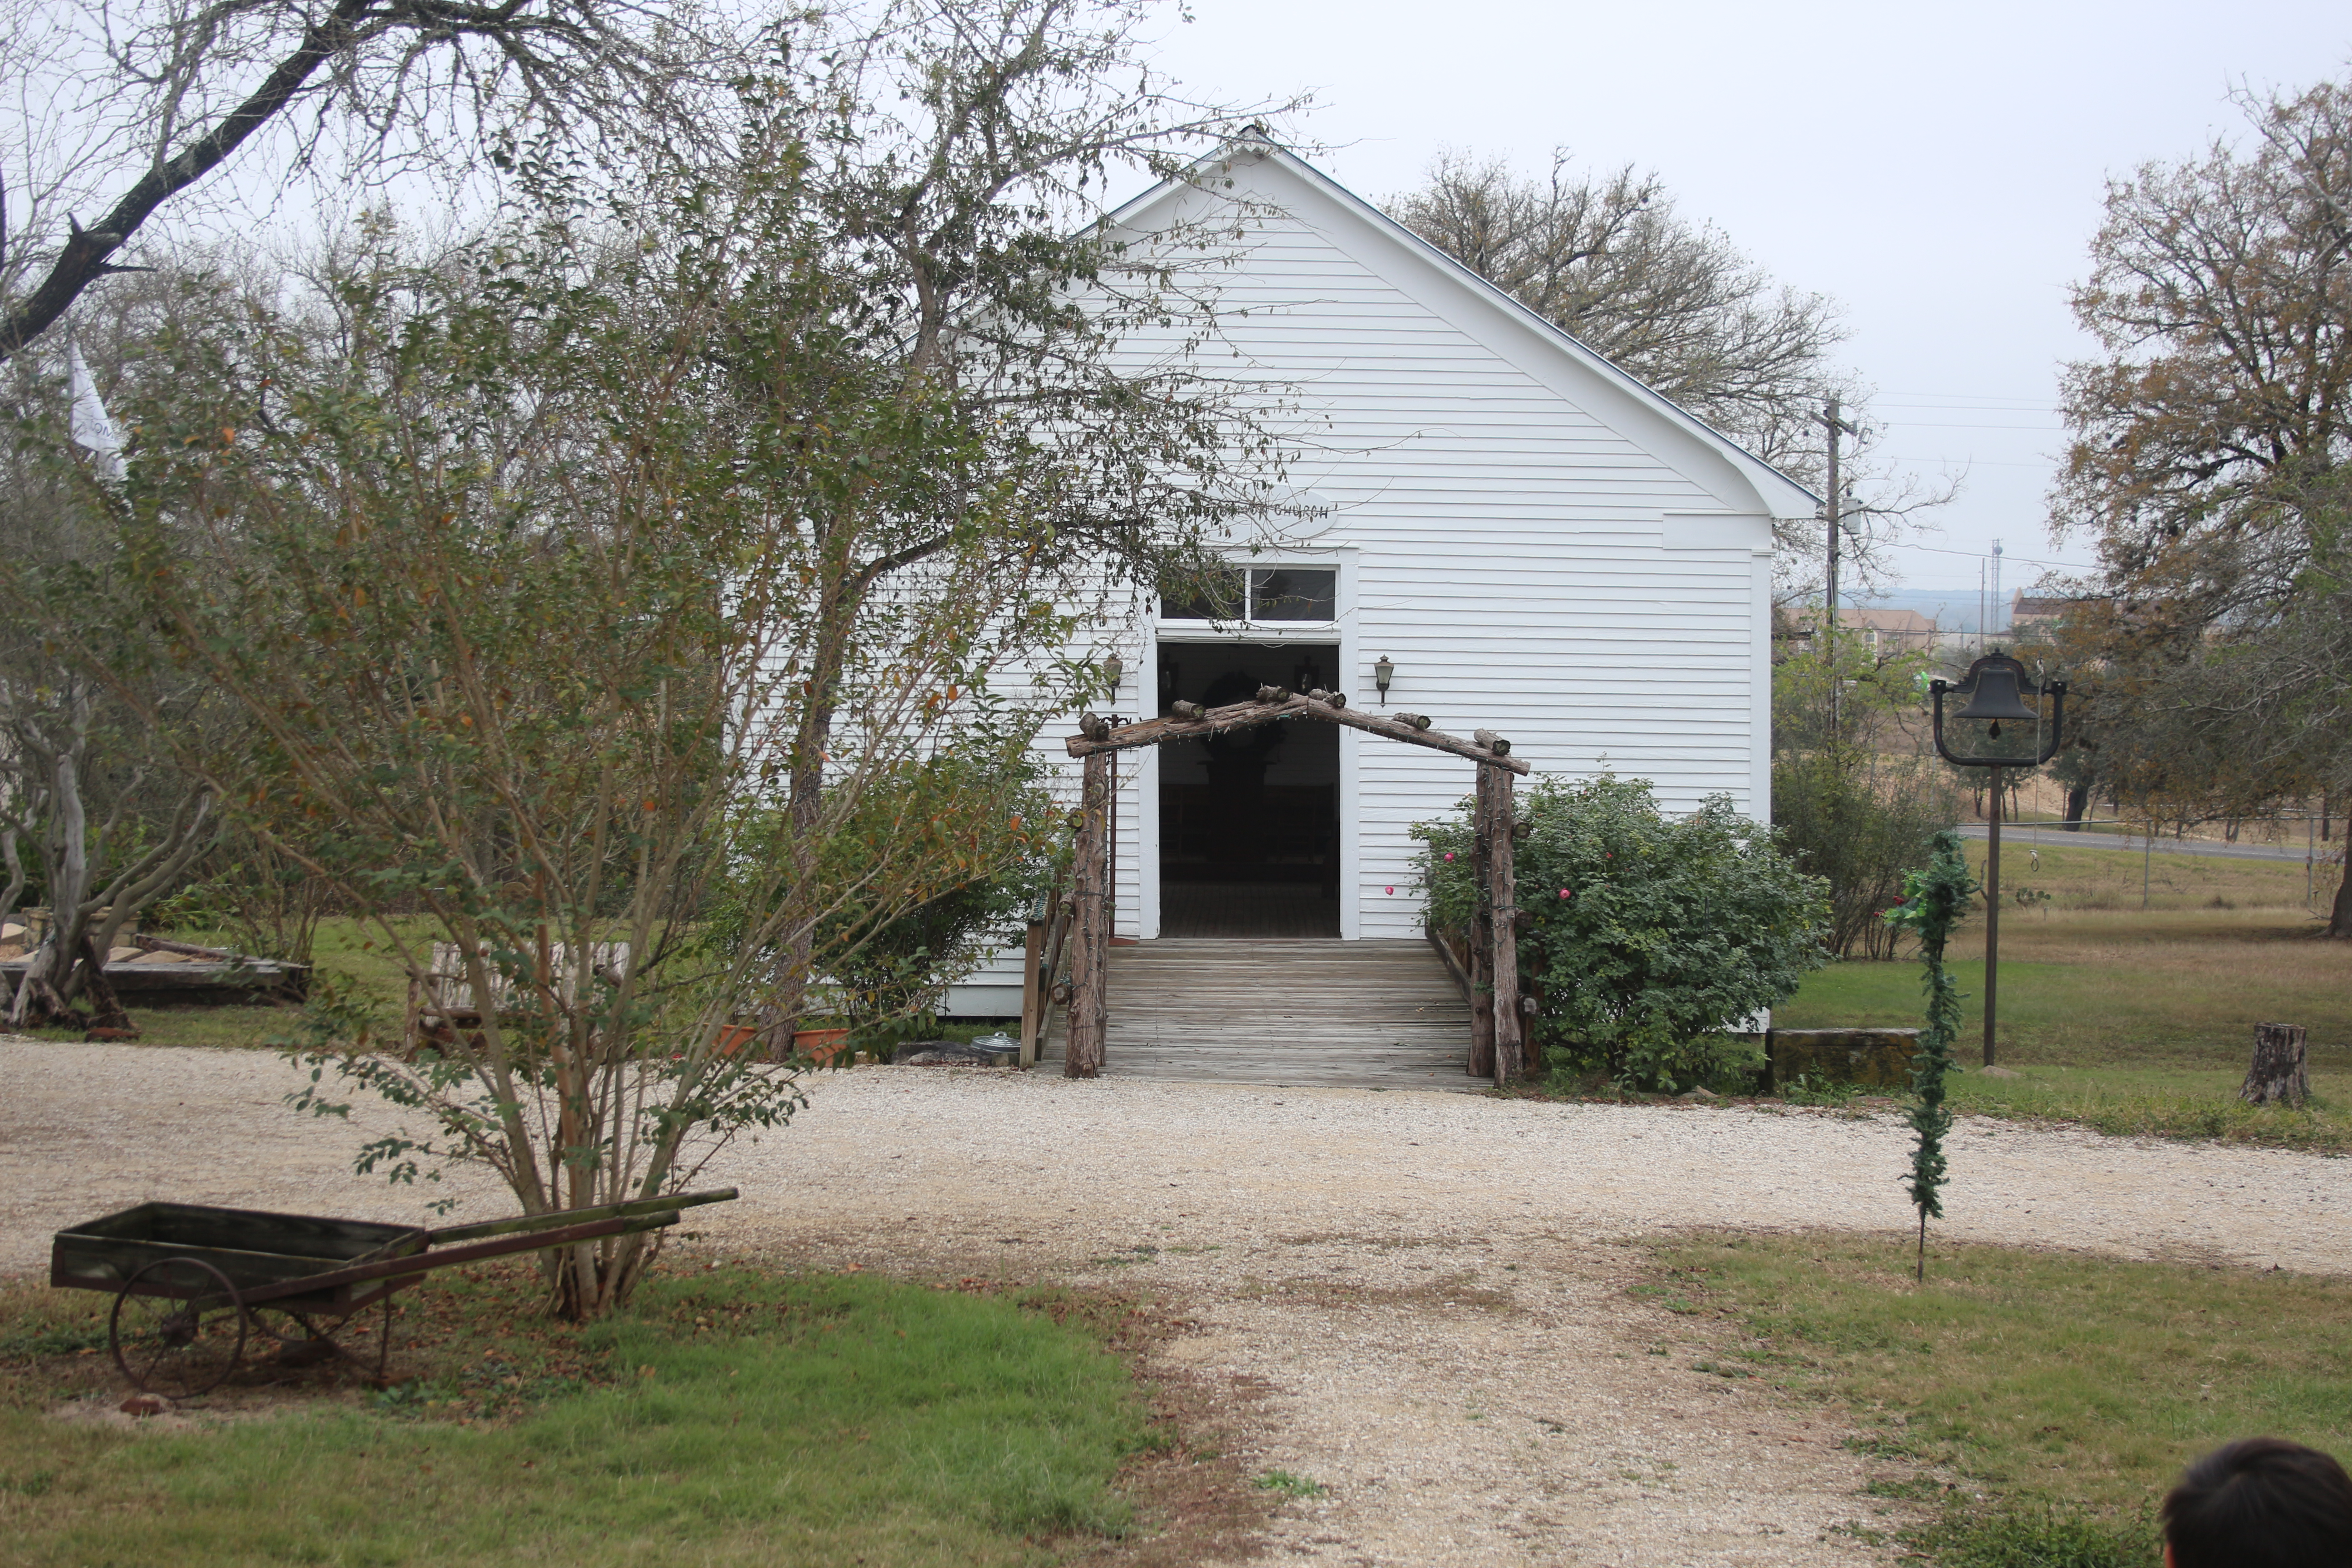 Six family-friendly things to do in Gonzales, Texas